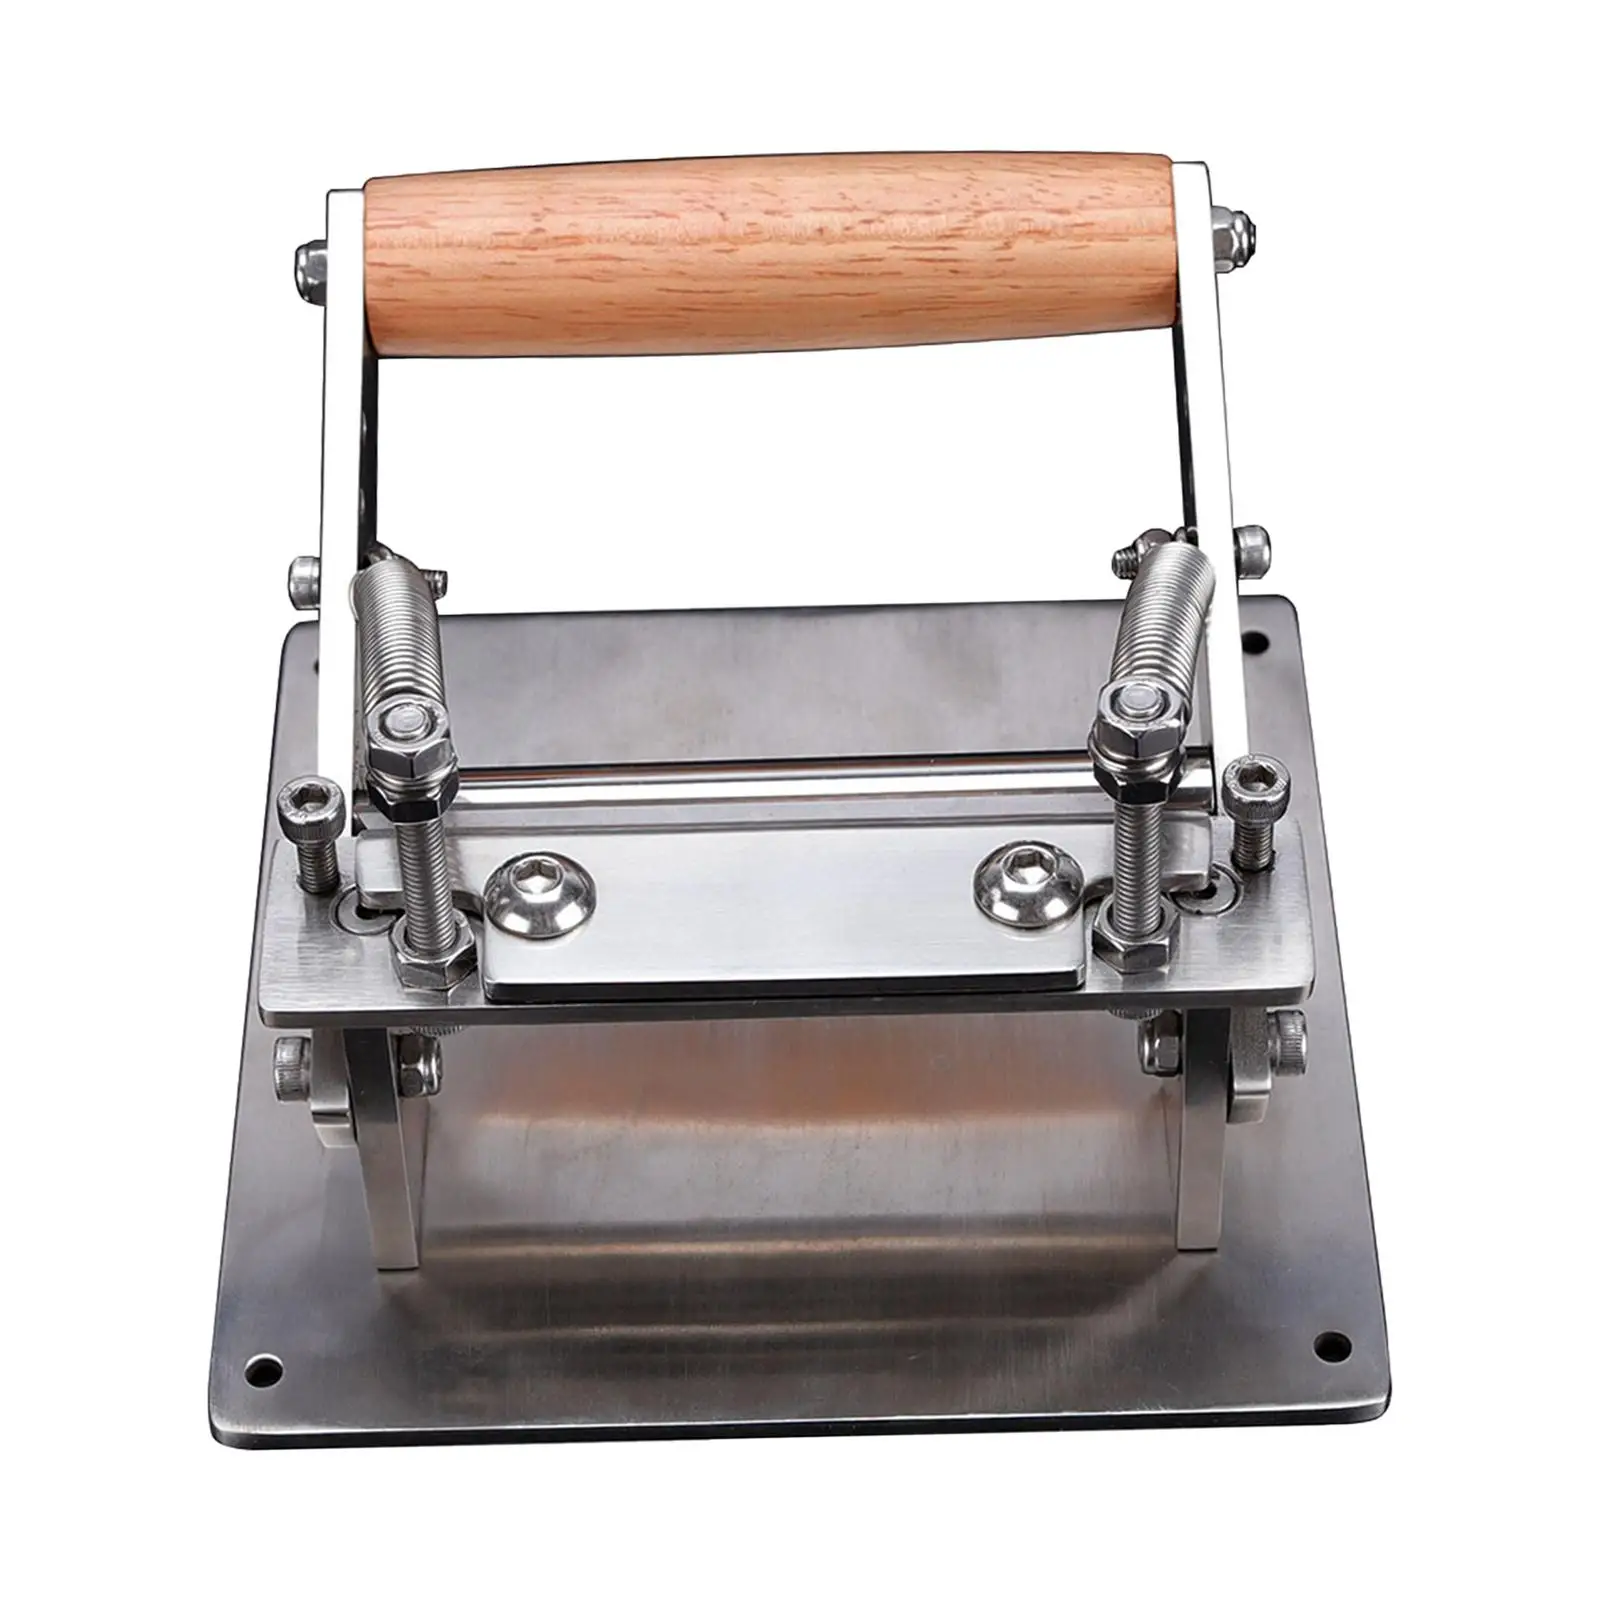 Leather Splitter Manual Leather Skiver Peeler Adjustable Splitter Machine Leather Working Tool for Thinning